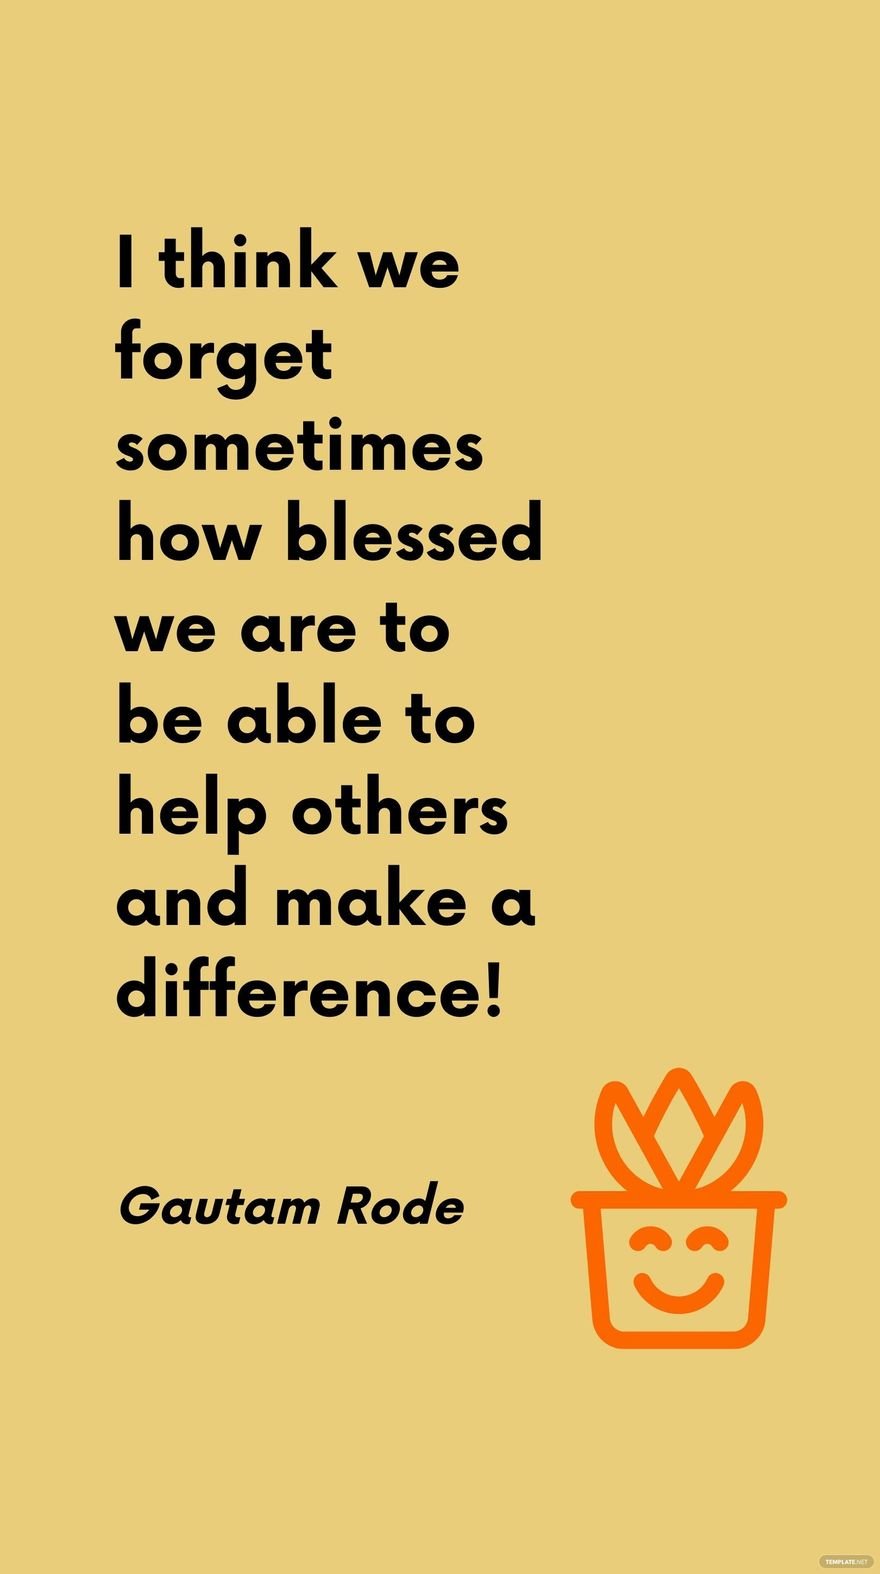 Free Gautam Rode - I think we forget sometimes how blessed we are to be able to help others and make a difference! in JPG